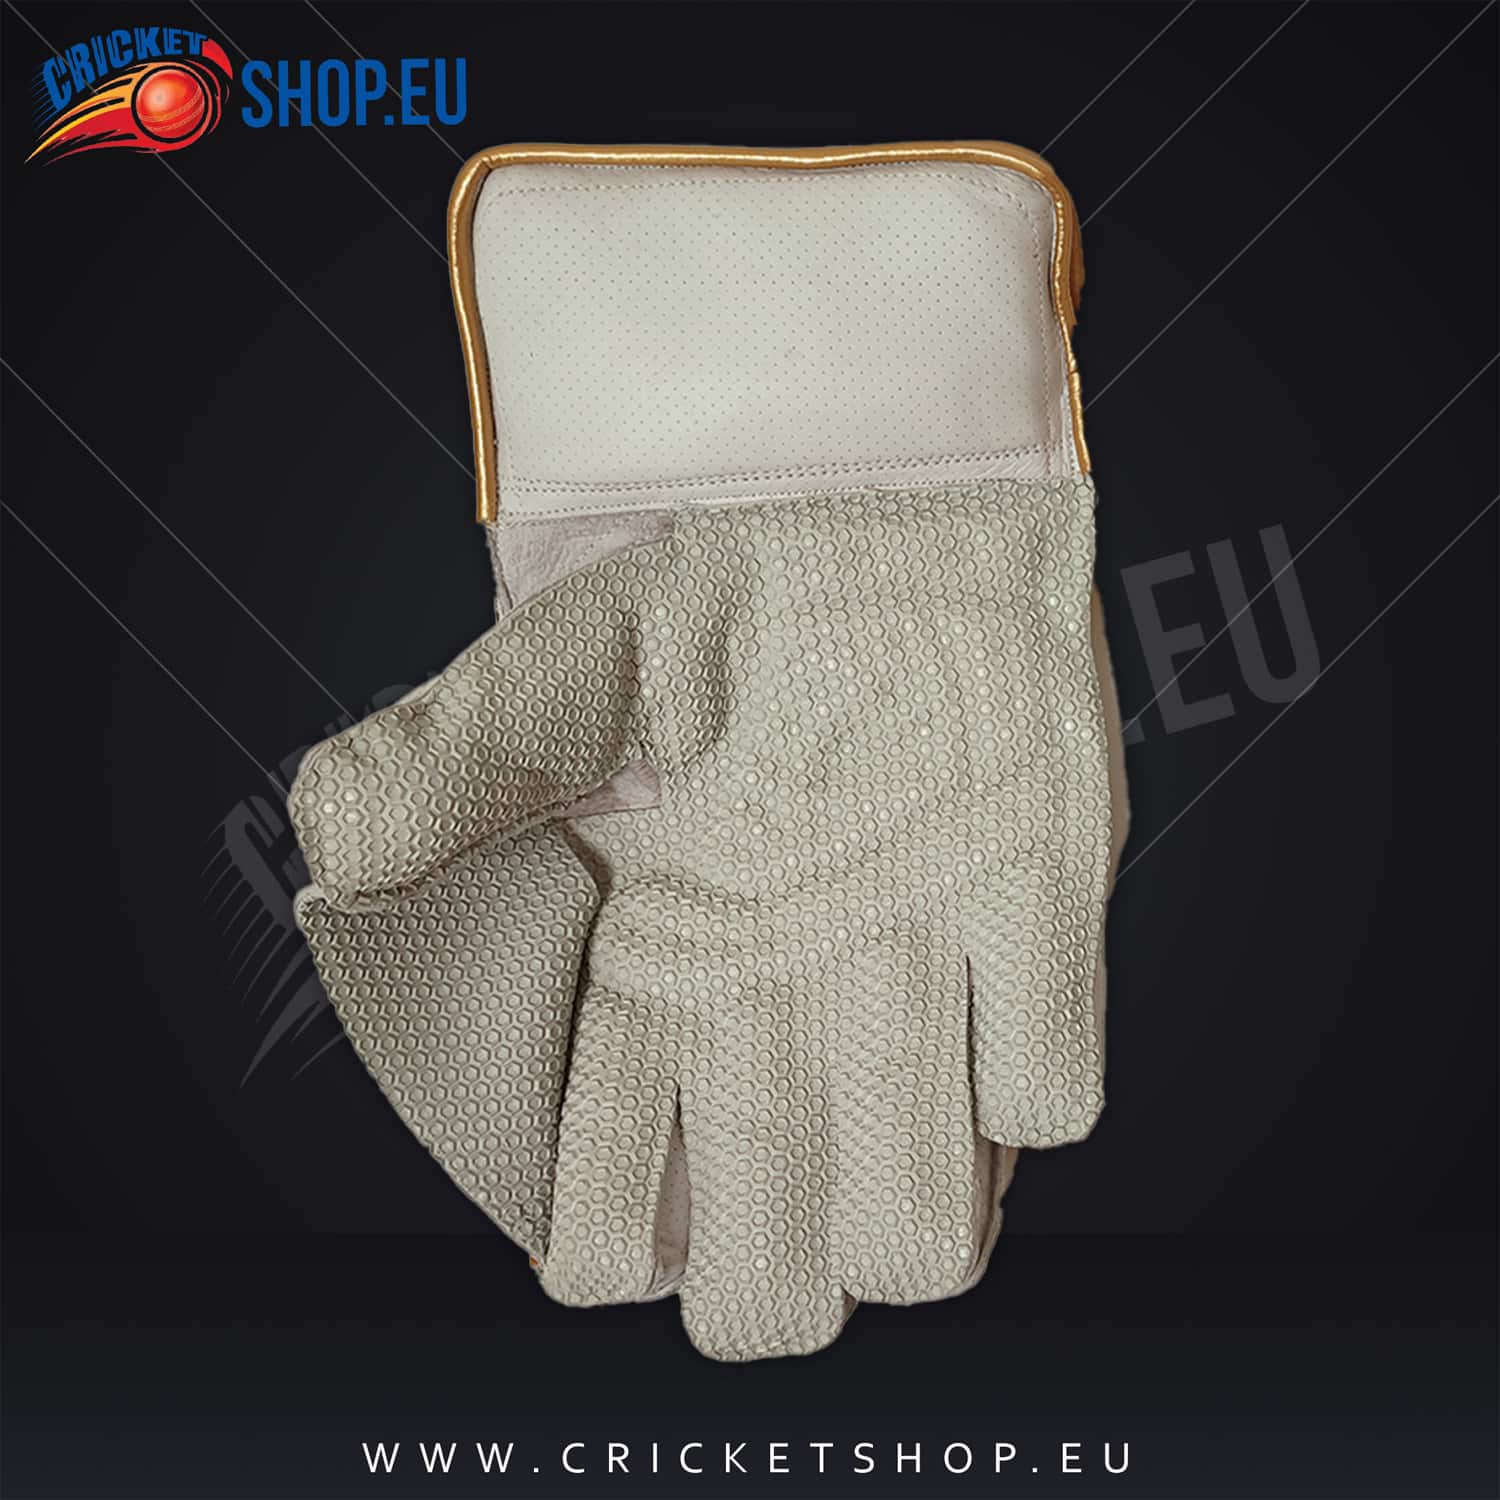 DS Sports Wicket Keeping Gloves